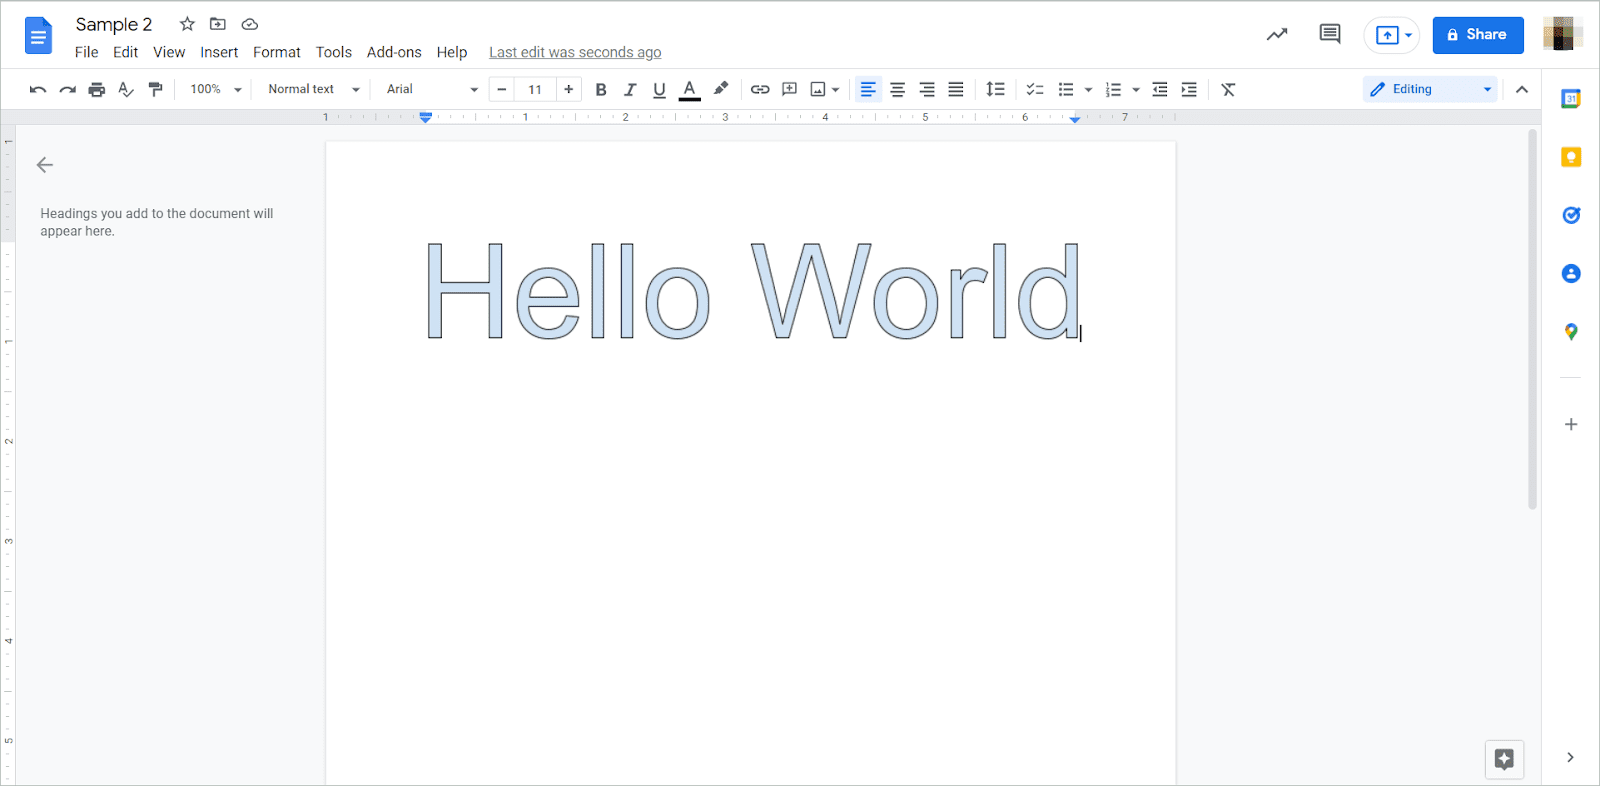 Word Art displayed in the document